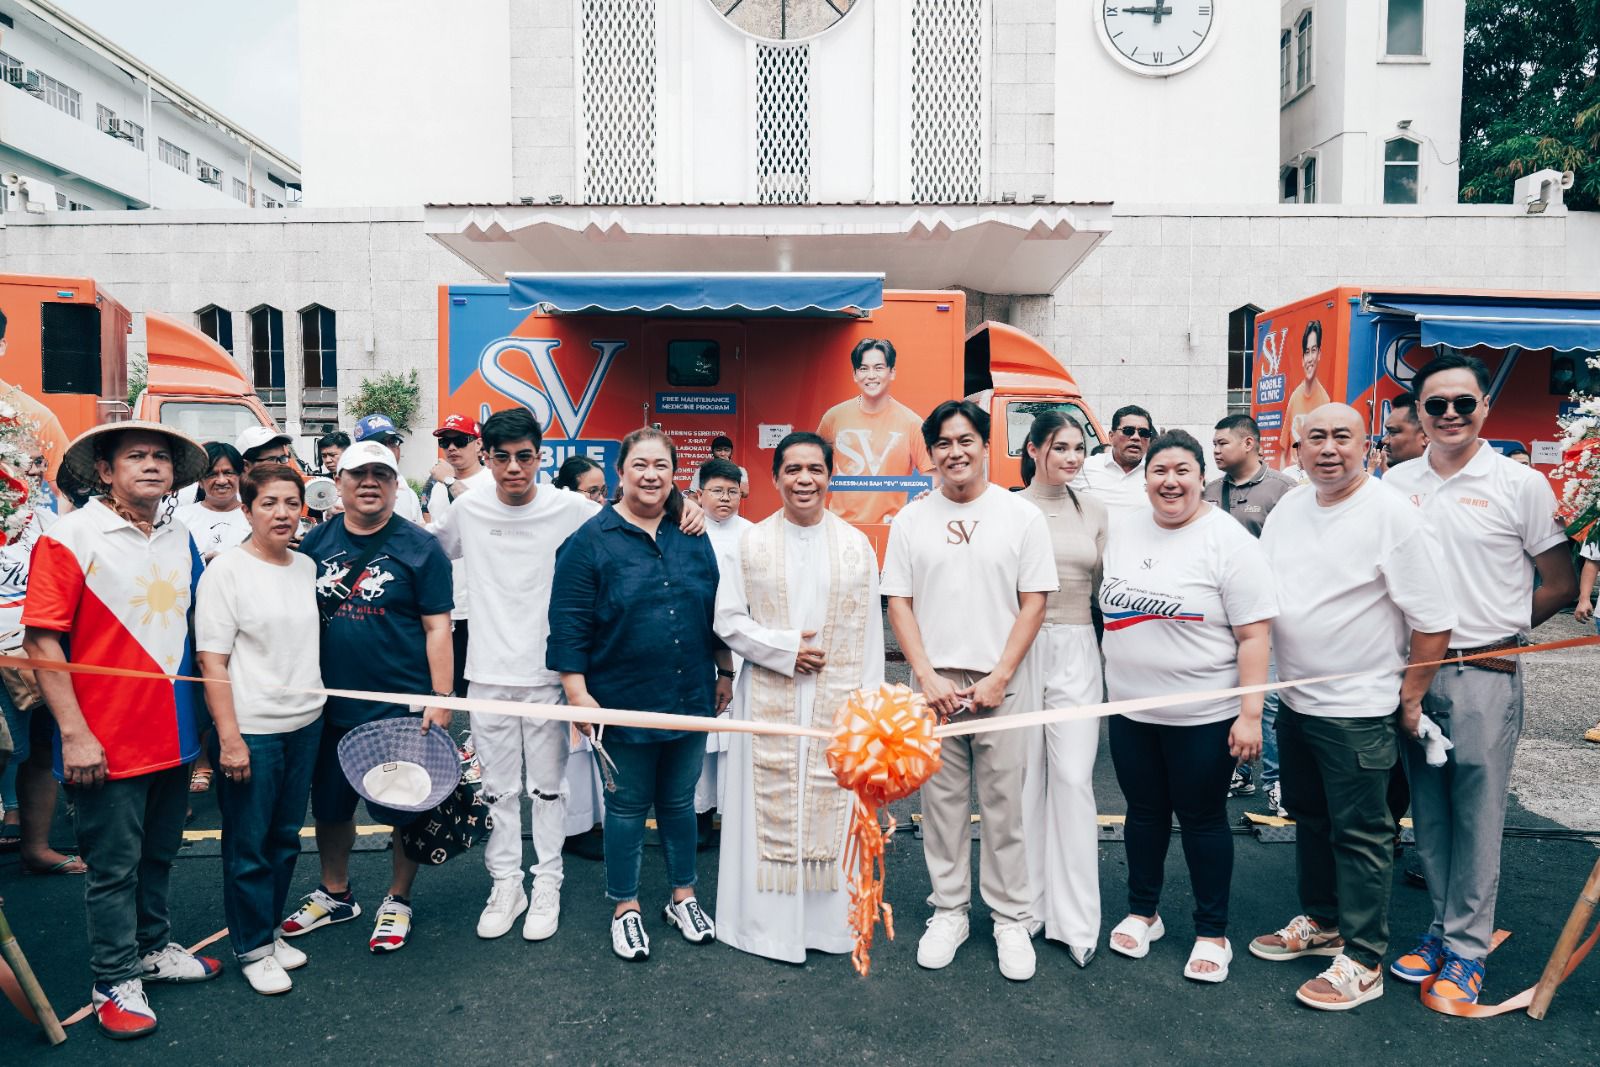 On the significant occasion of Philippine Independence Day, Sam “SV” Verzosa launched a series of initiatives to support the people of Sampaloc.